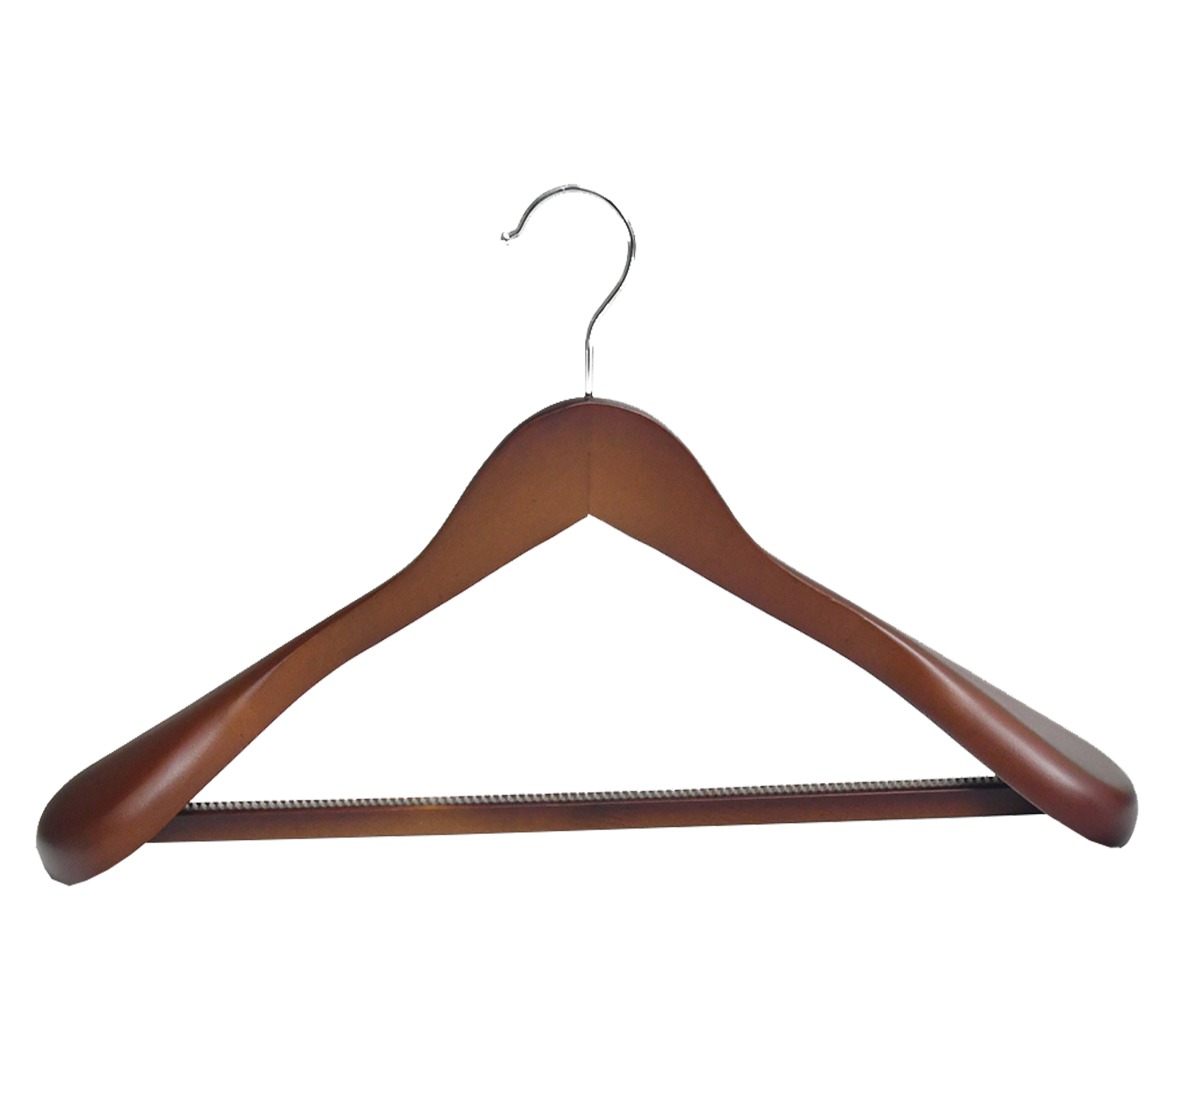 Lotus Wood Coat Hanger For Clothes
